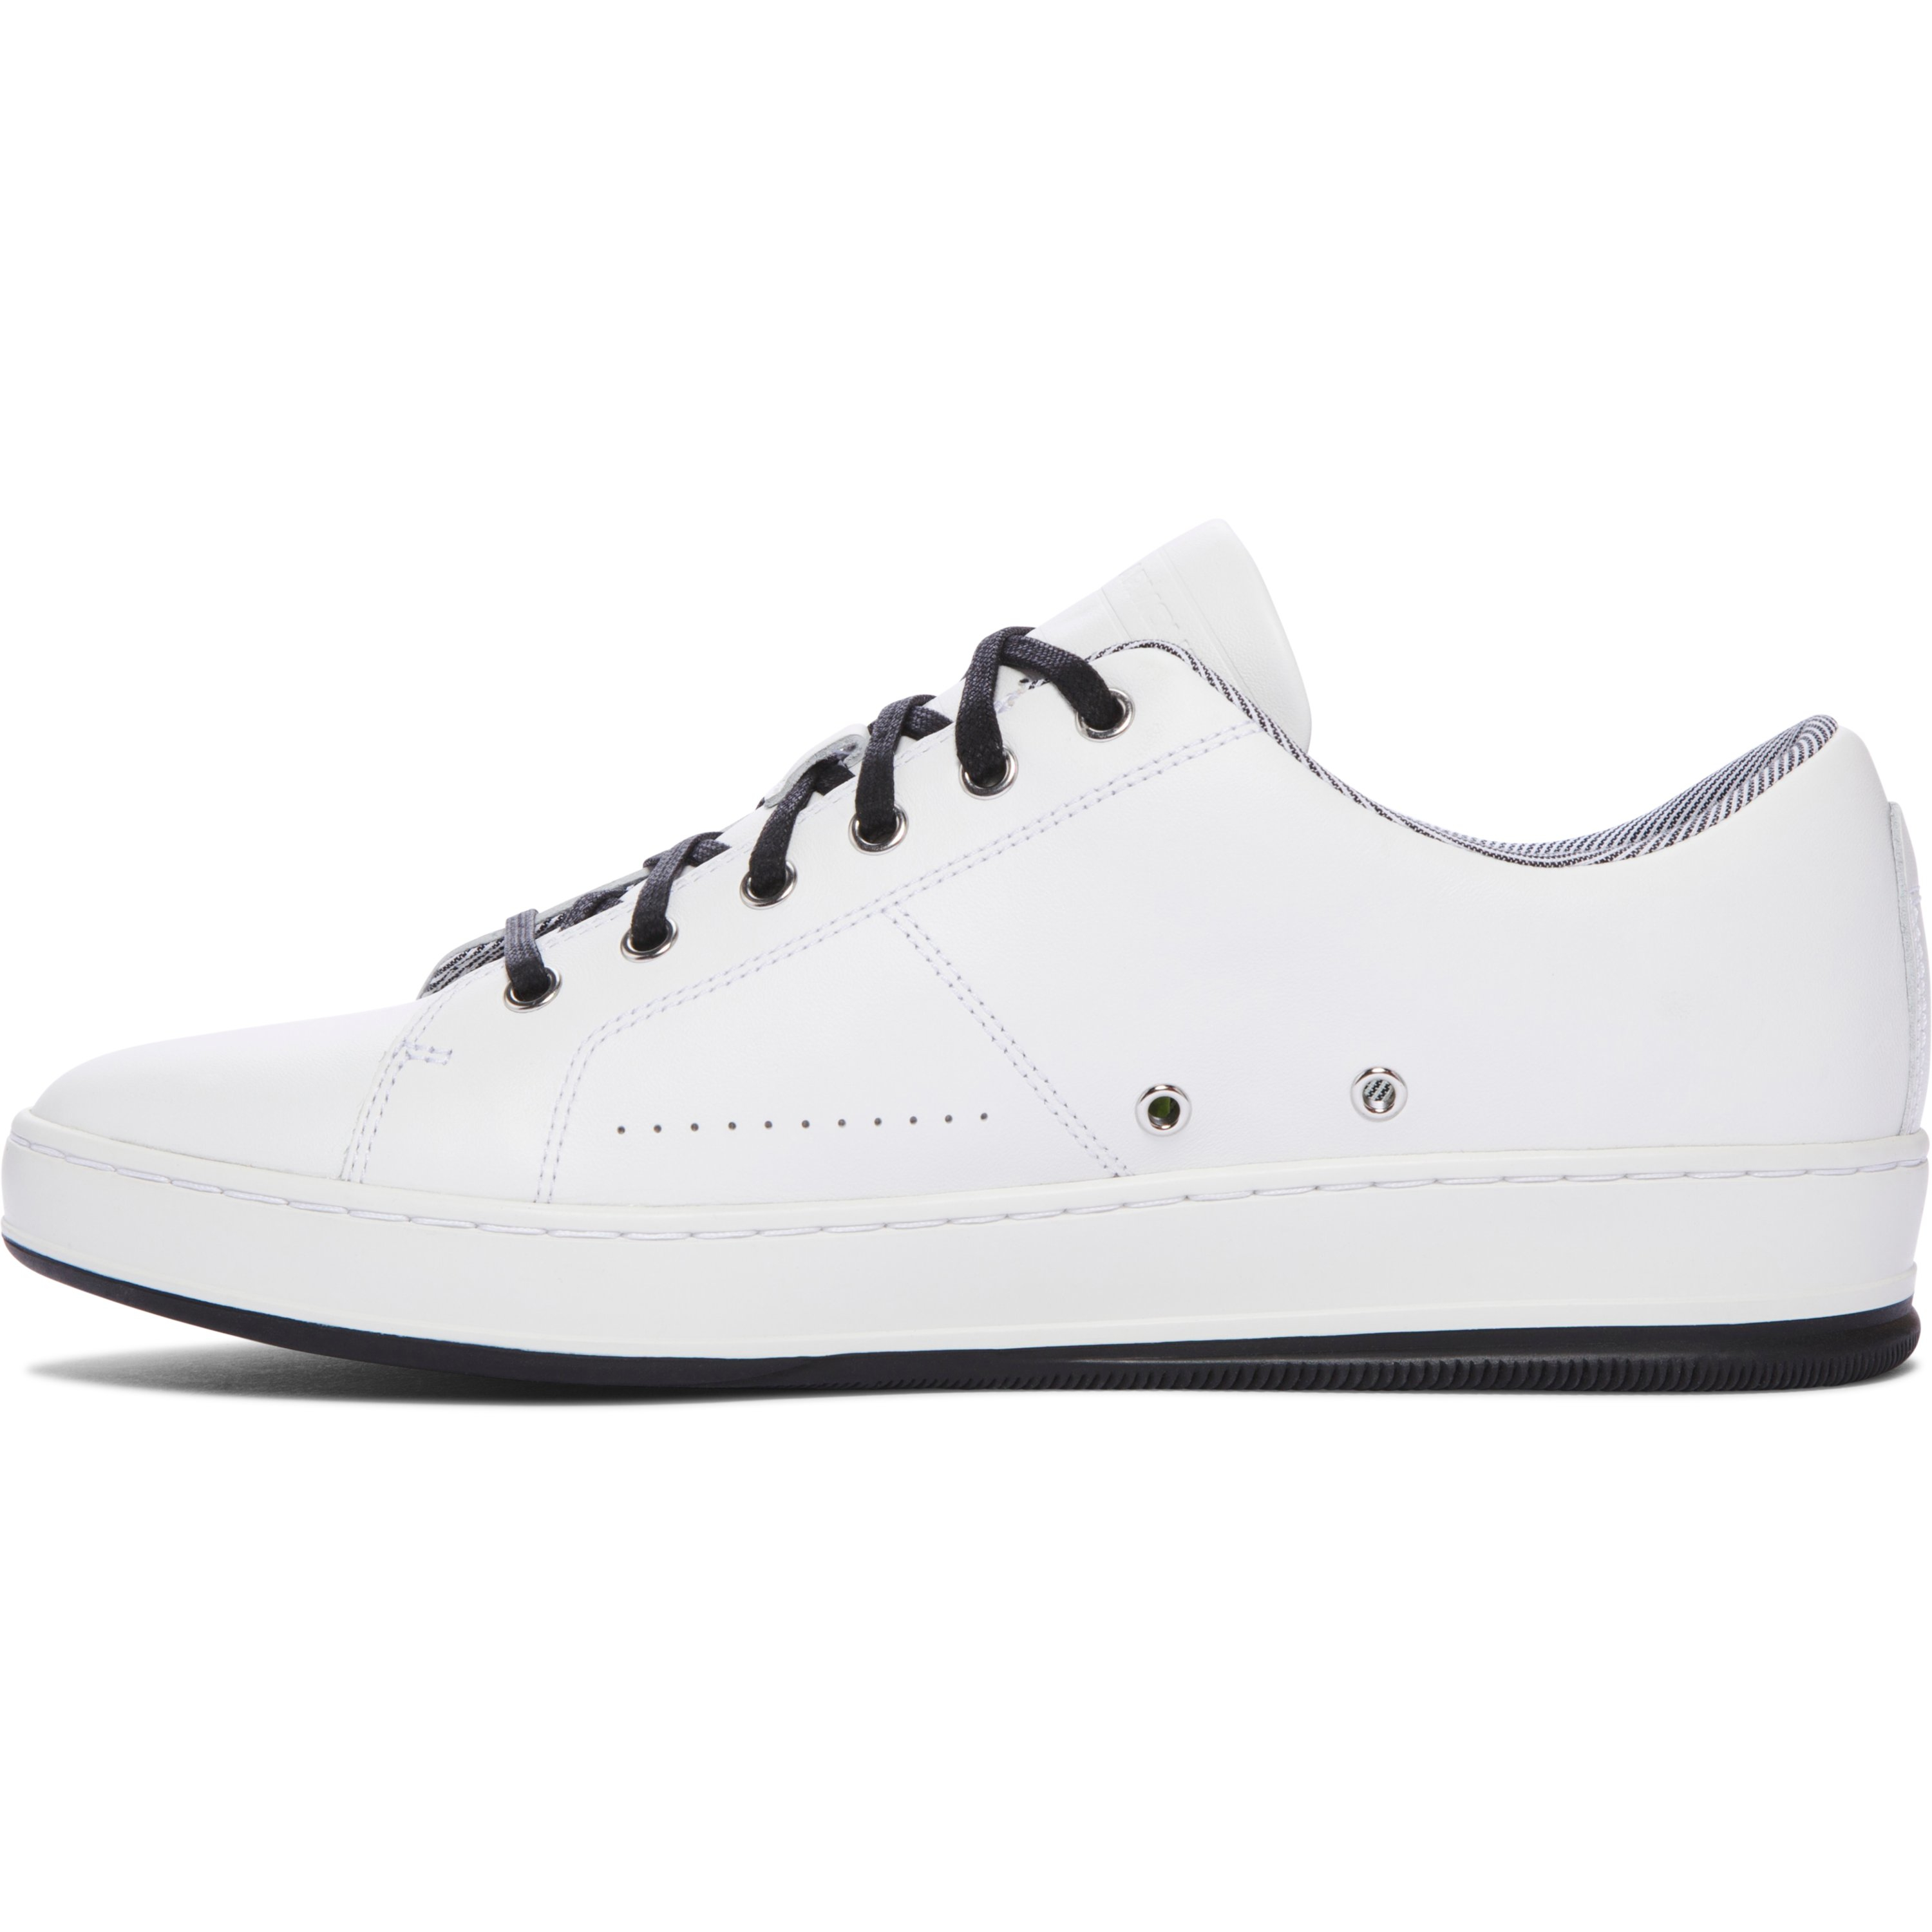 Lyst - Under Armour Men's Ua Club Leather Shoes in White for Men